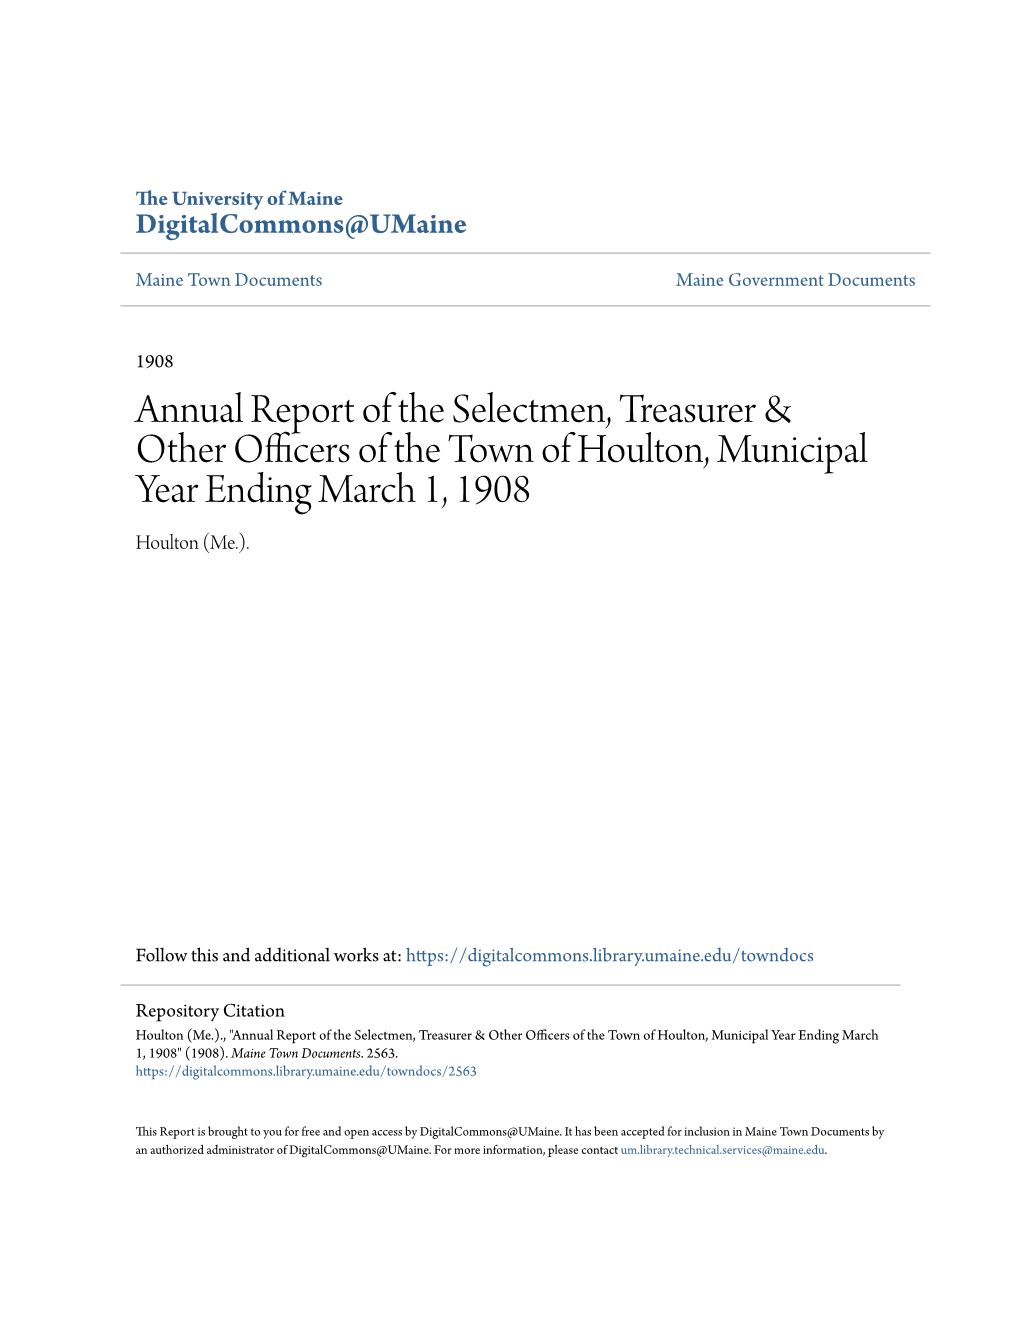 Annual Report of the Selectmen, Treasurer & Other Officers of The